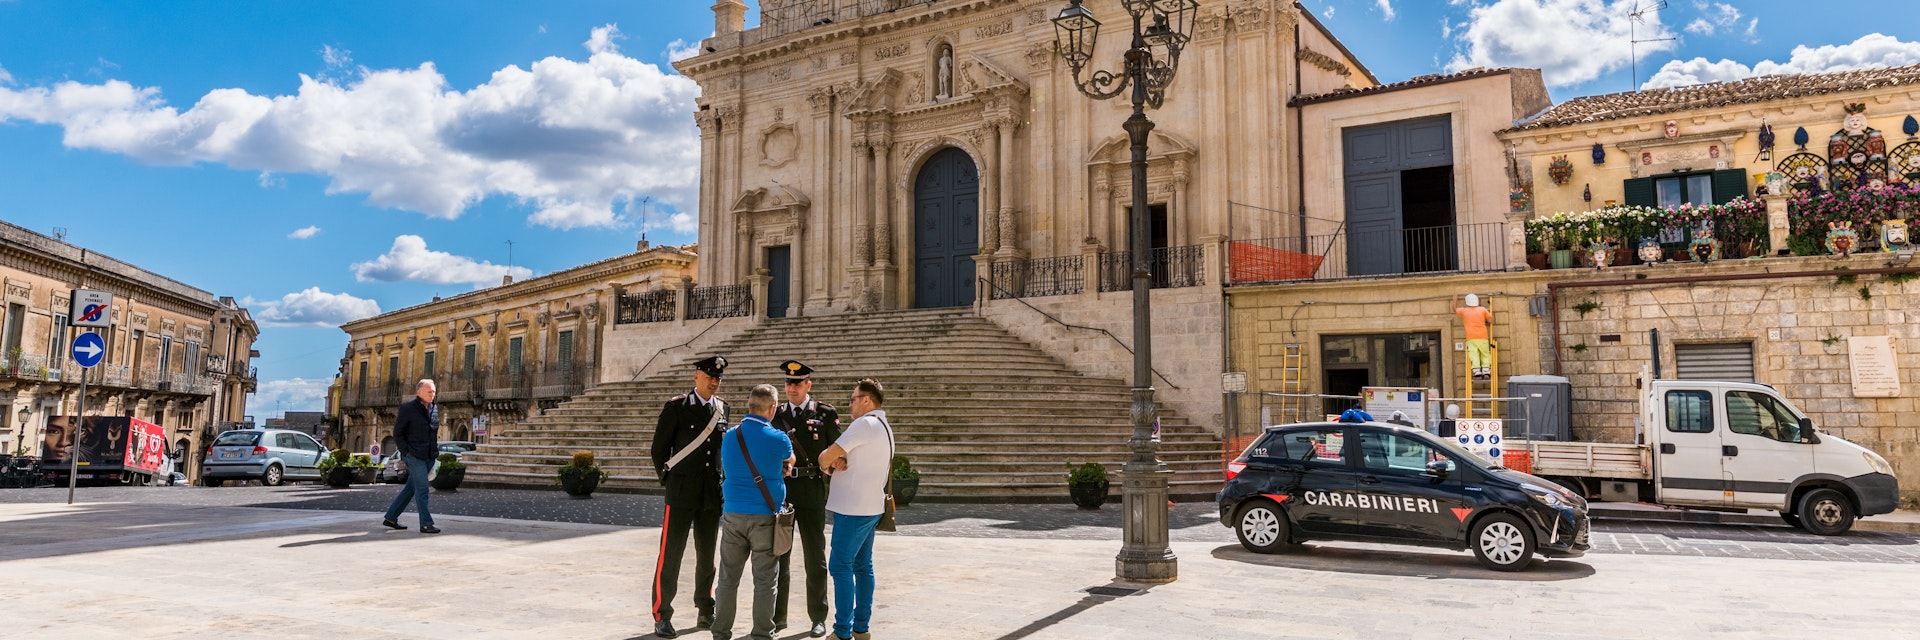 Palazzolo Acreide/ Syracuse Sicily/ Italy - october 04 2019: Two Carabinieri speak and give information to some tourists, on the steps in front of the cathedral of Palazzolo Acreide
1181168446
shops, attraction, baroque, bell tower, building, columns, cops, dome, exterior, flight of steps, heritage, historic, outdoor, police, style, temple, tourists, upright, windows, cars, police man, lamp, palazzolo, clouds, benemerita, square